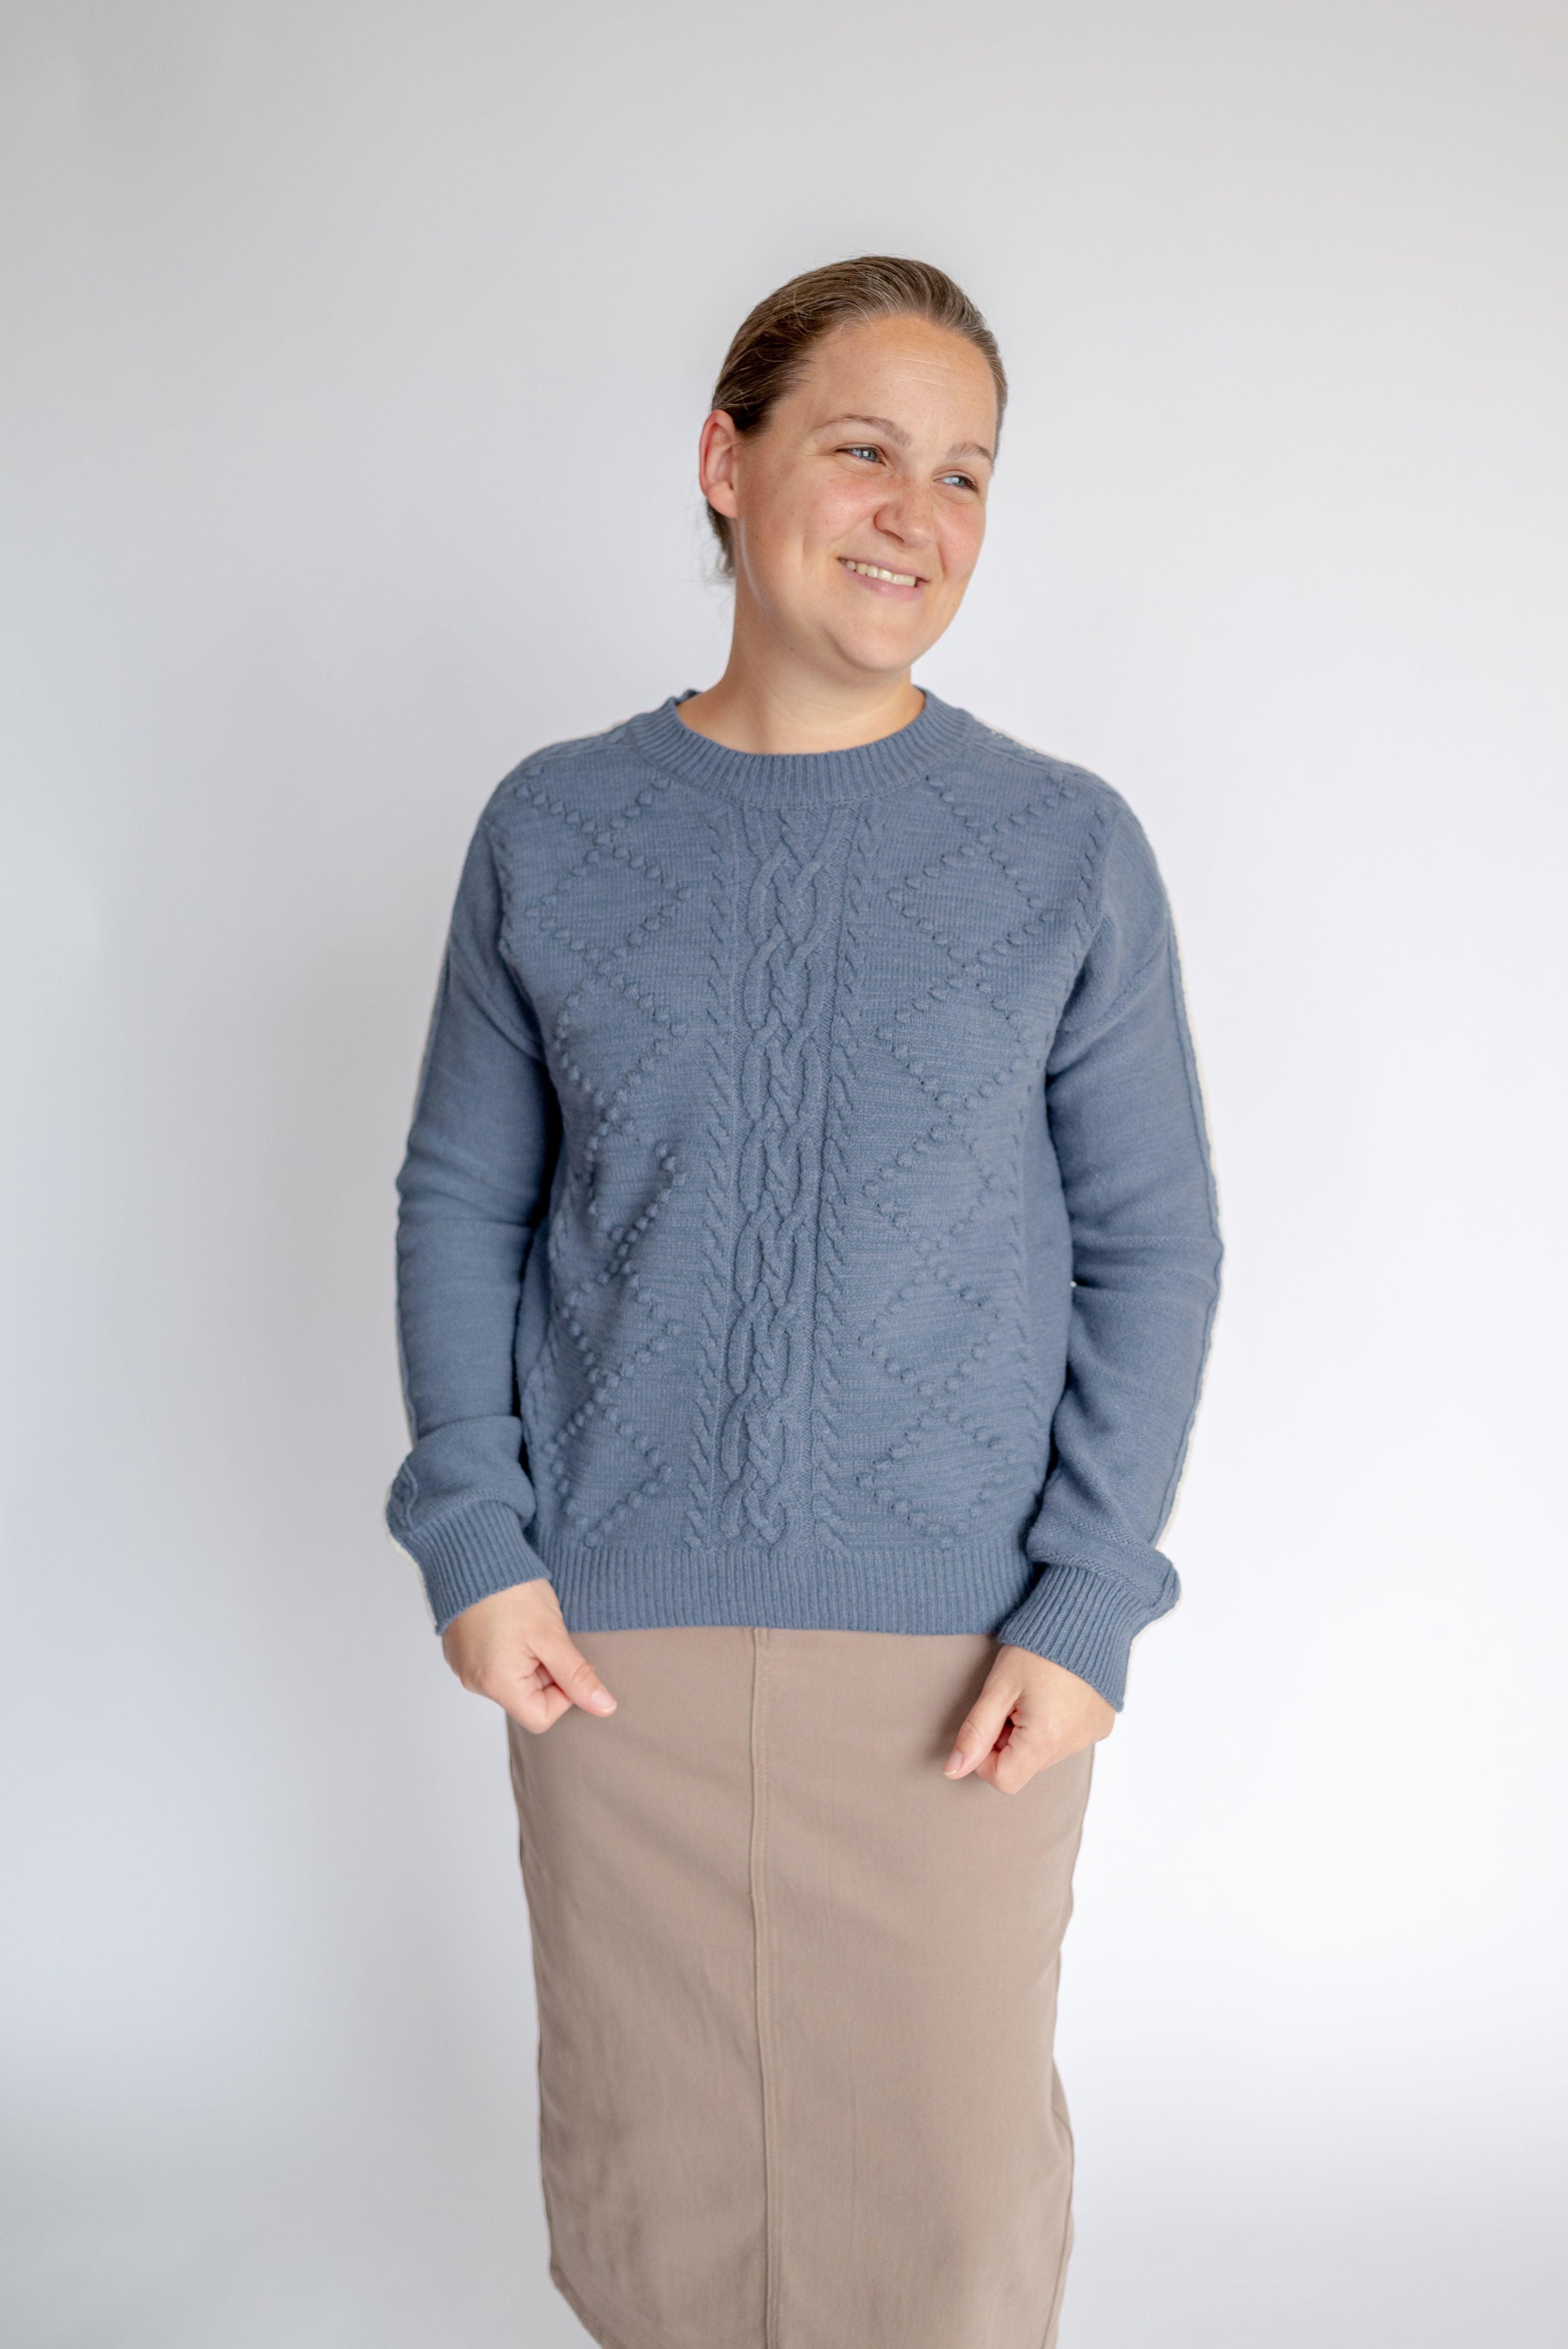 Carly Cable Knit Sweater in Denim Blue - Carly Cable Knit Sweater in Denim Blue - undefined - Salt and Honey